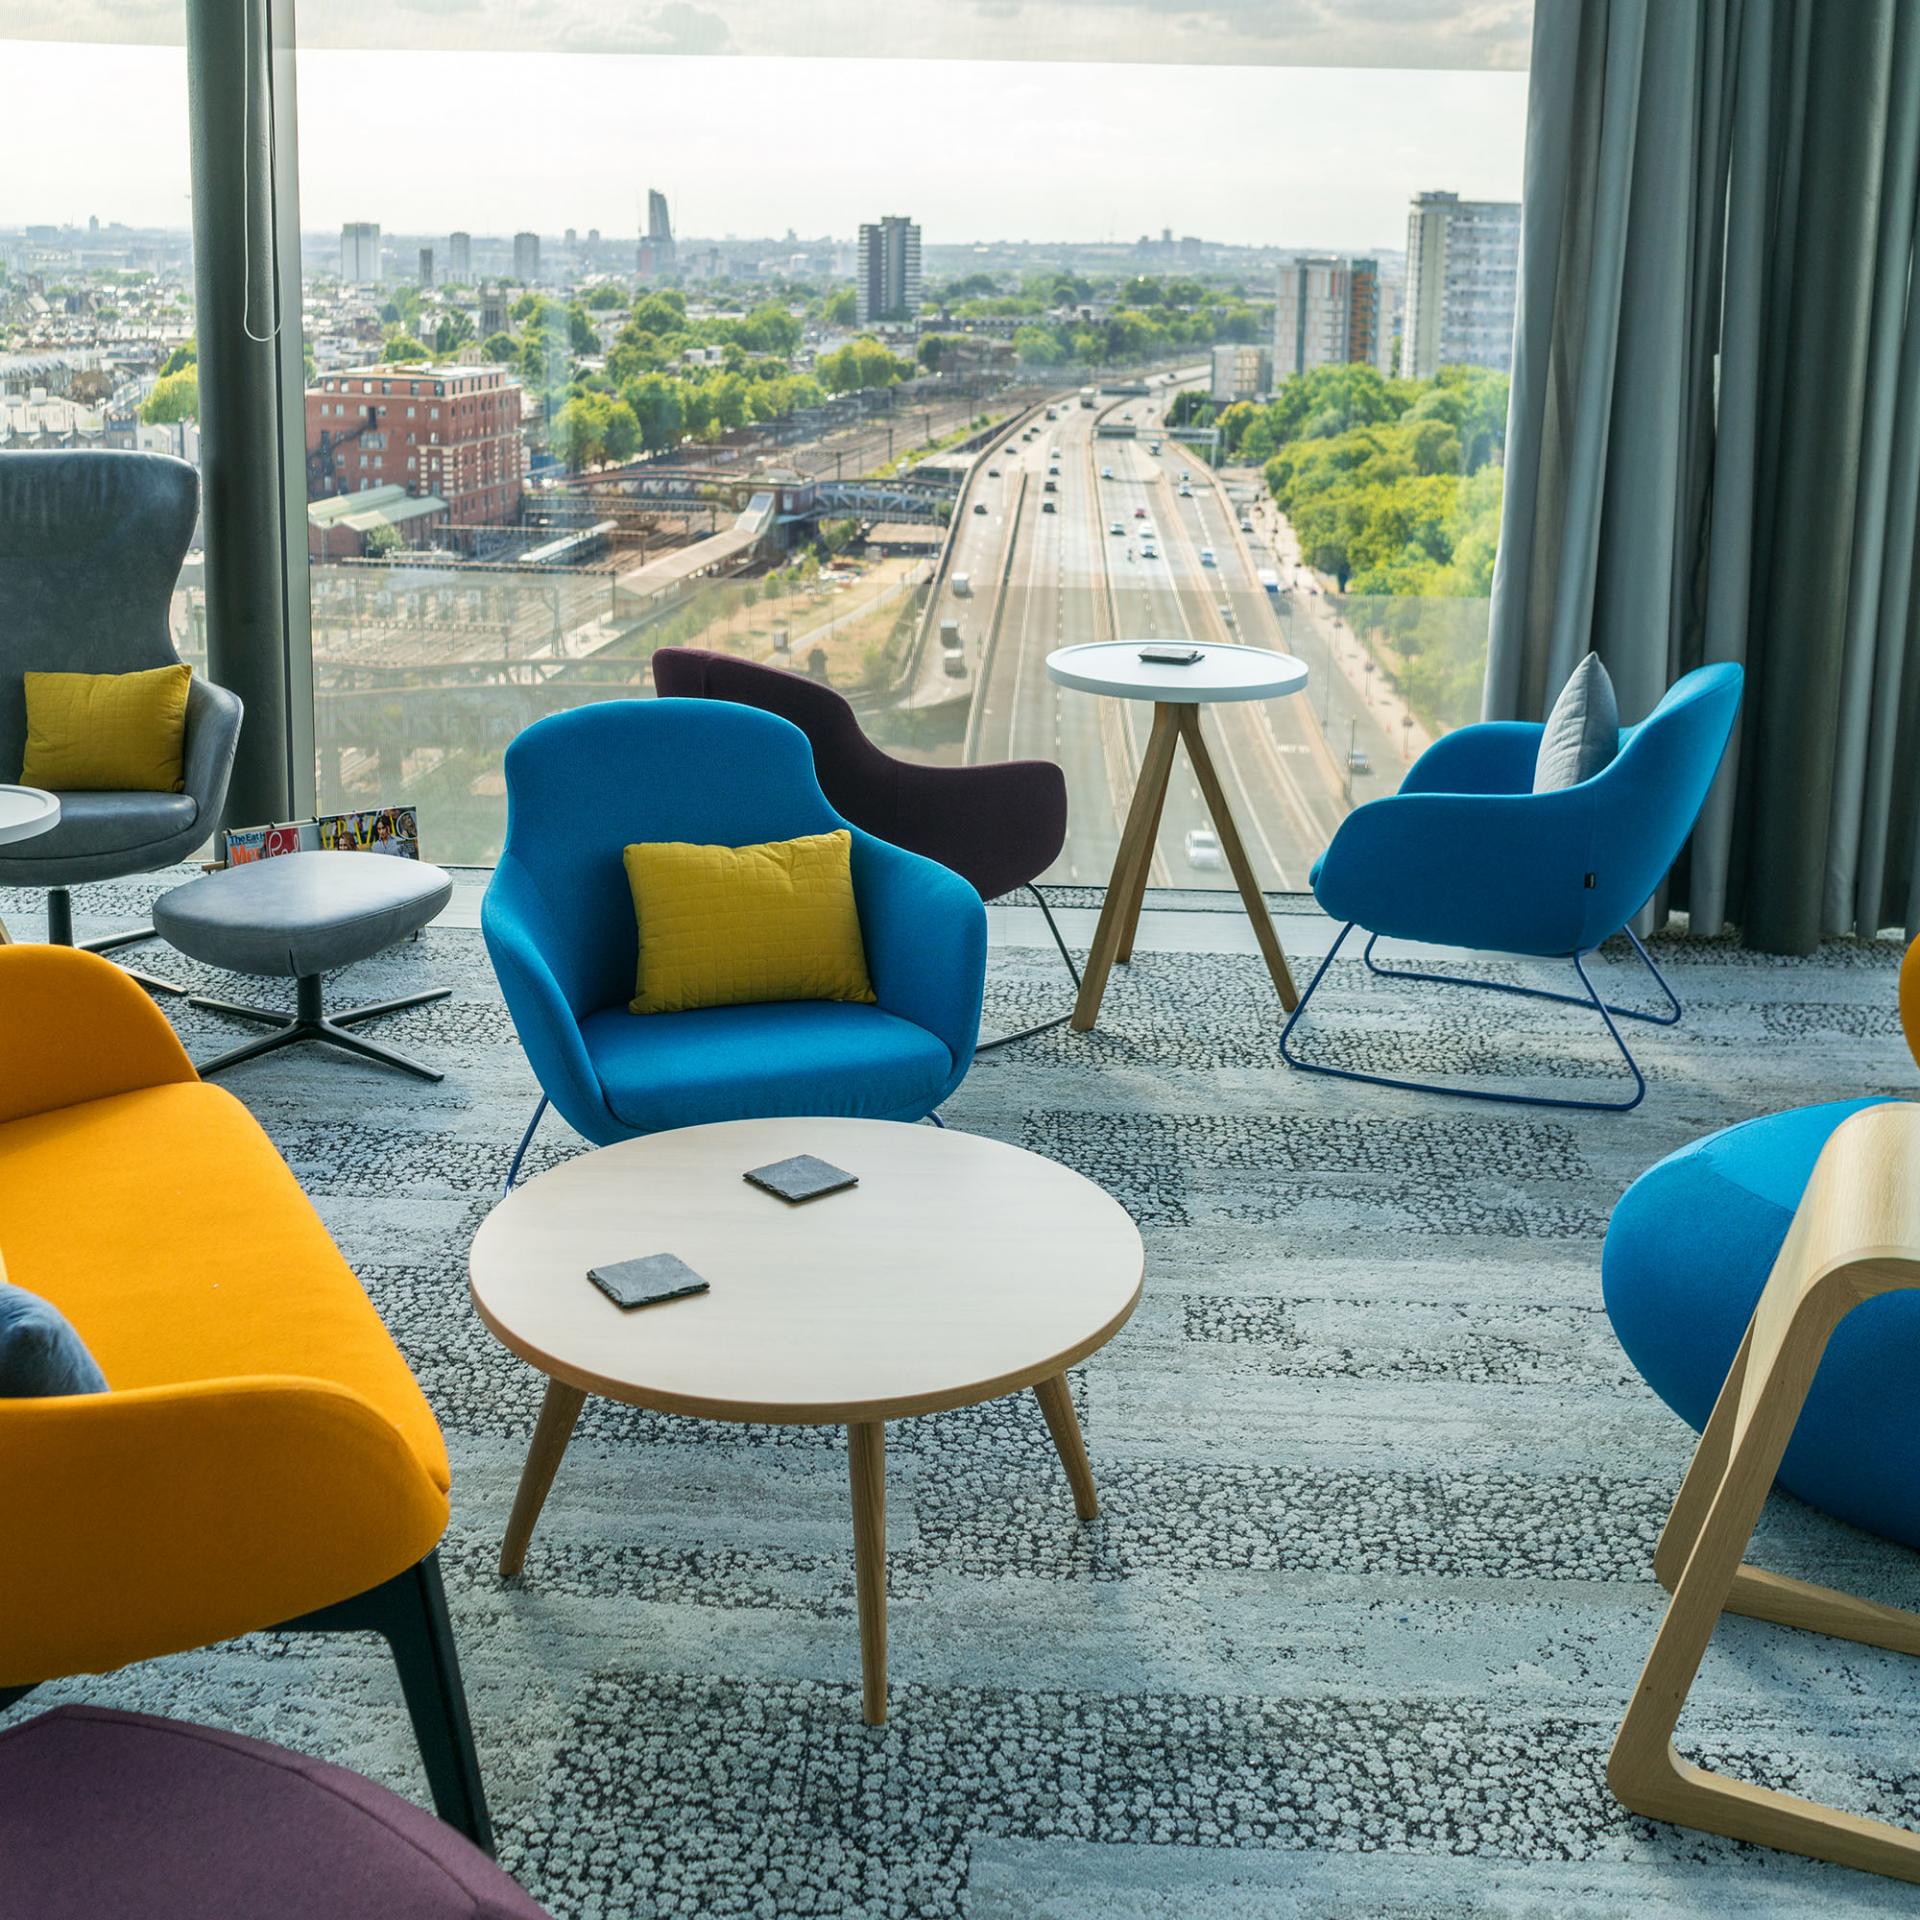 Employee gathering space at the Vertex Pharmaceuticals international headquarters in London